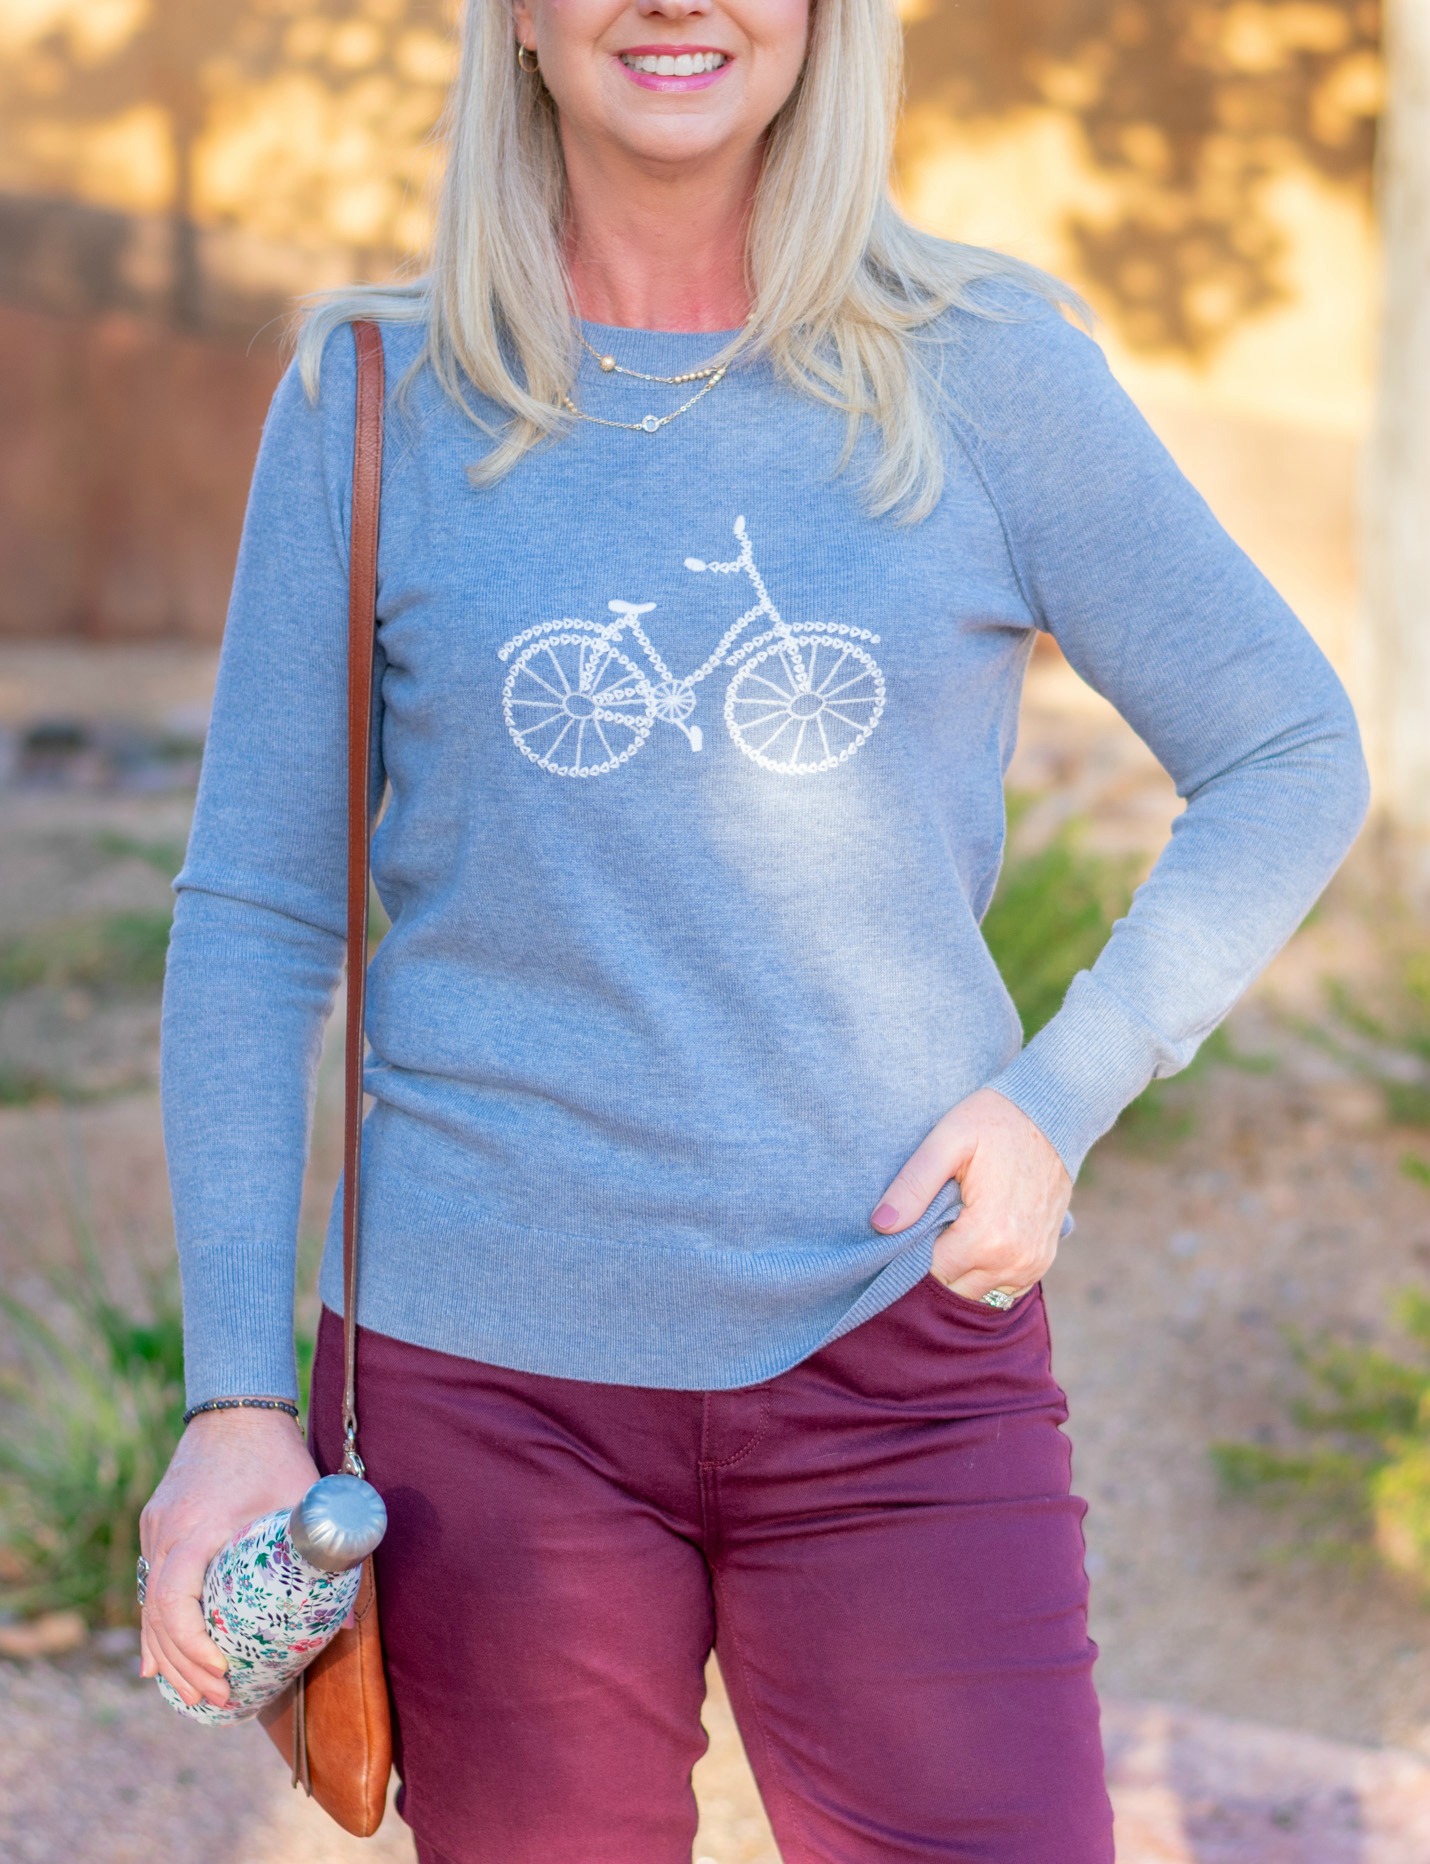 Fun Pullover + Merlot Jeans for a Casual Fall Look 